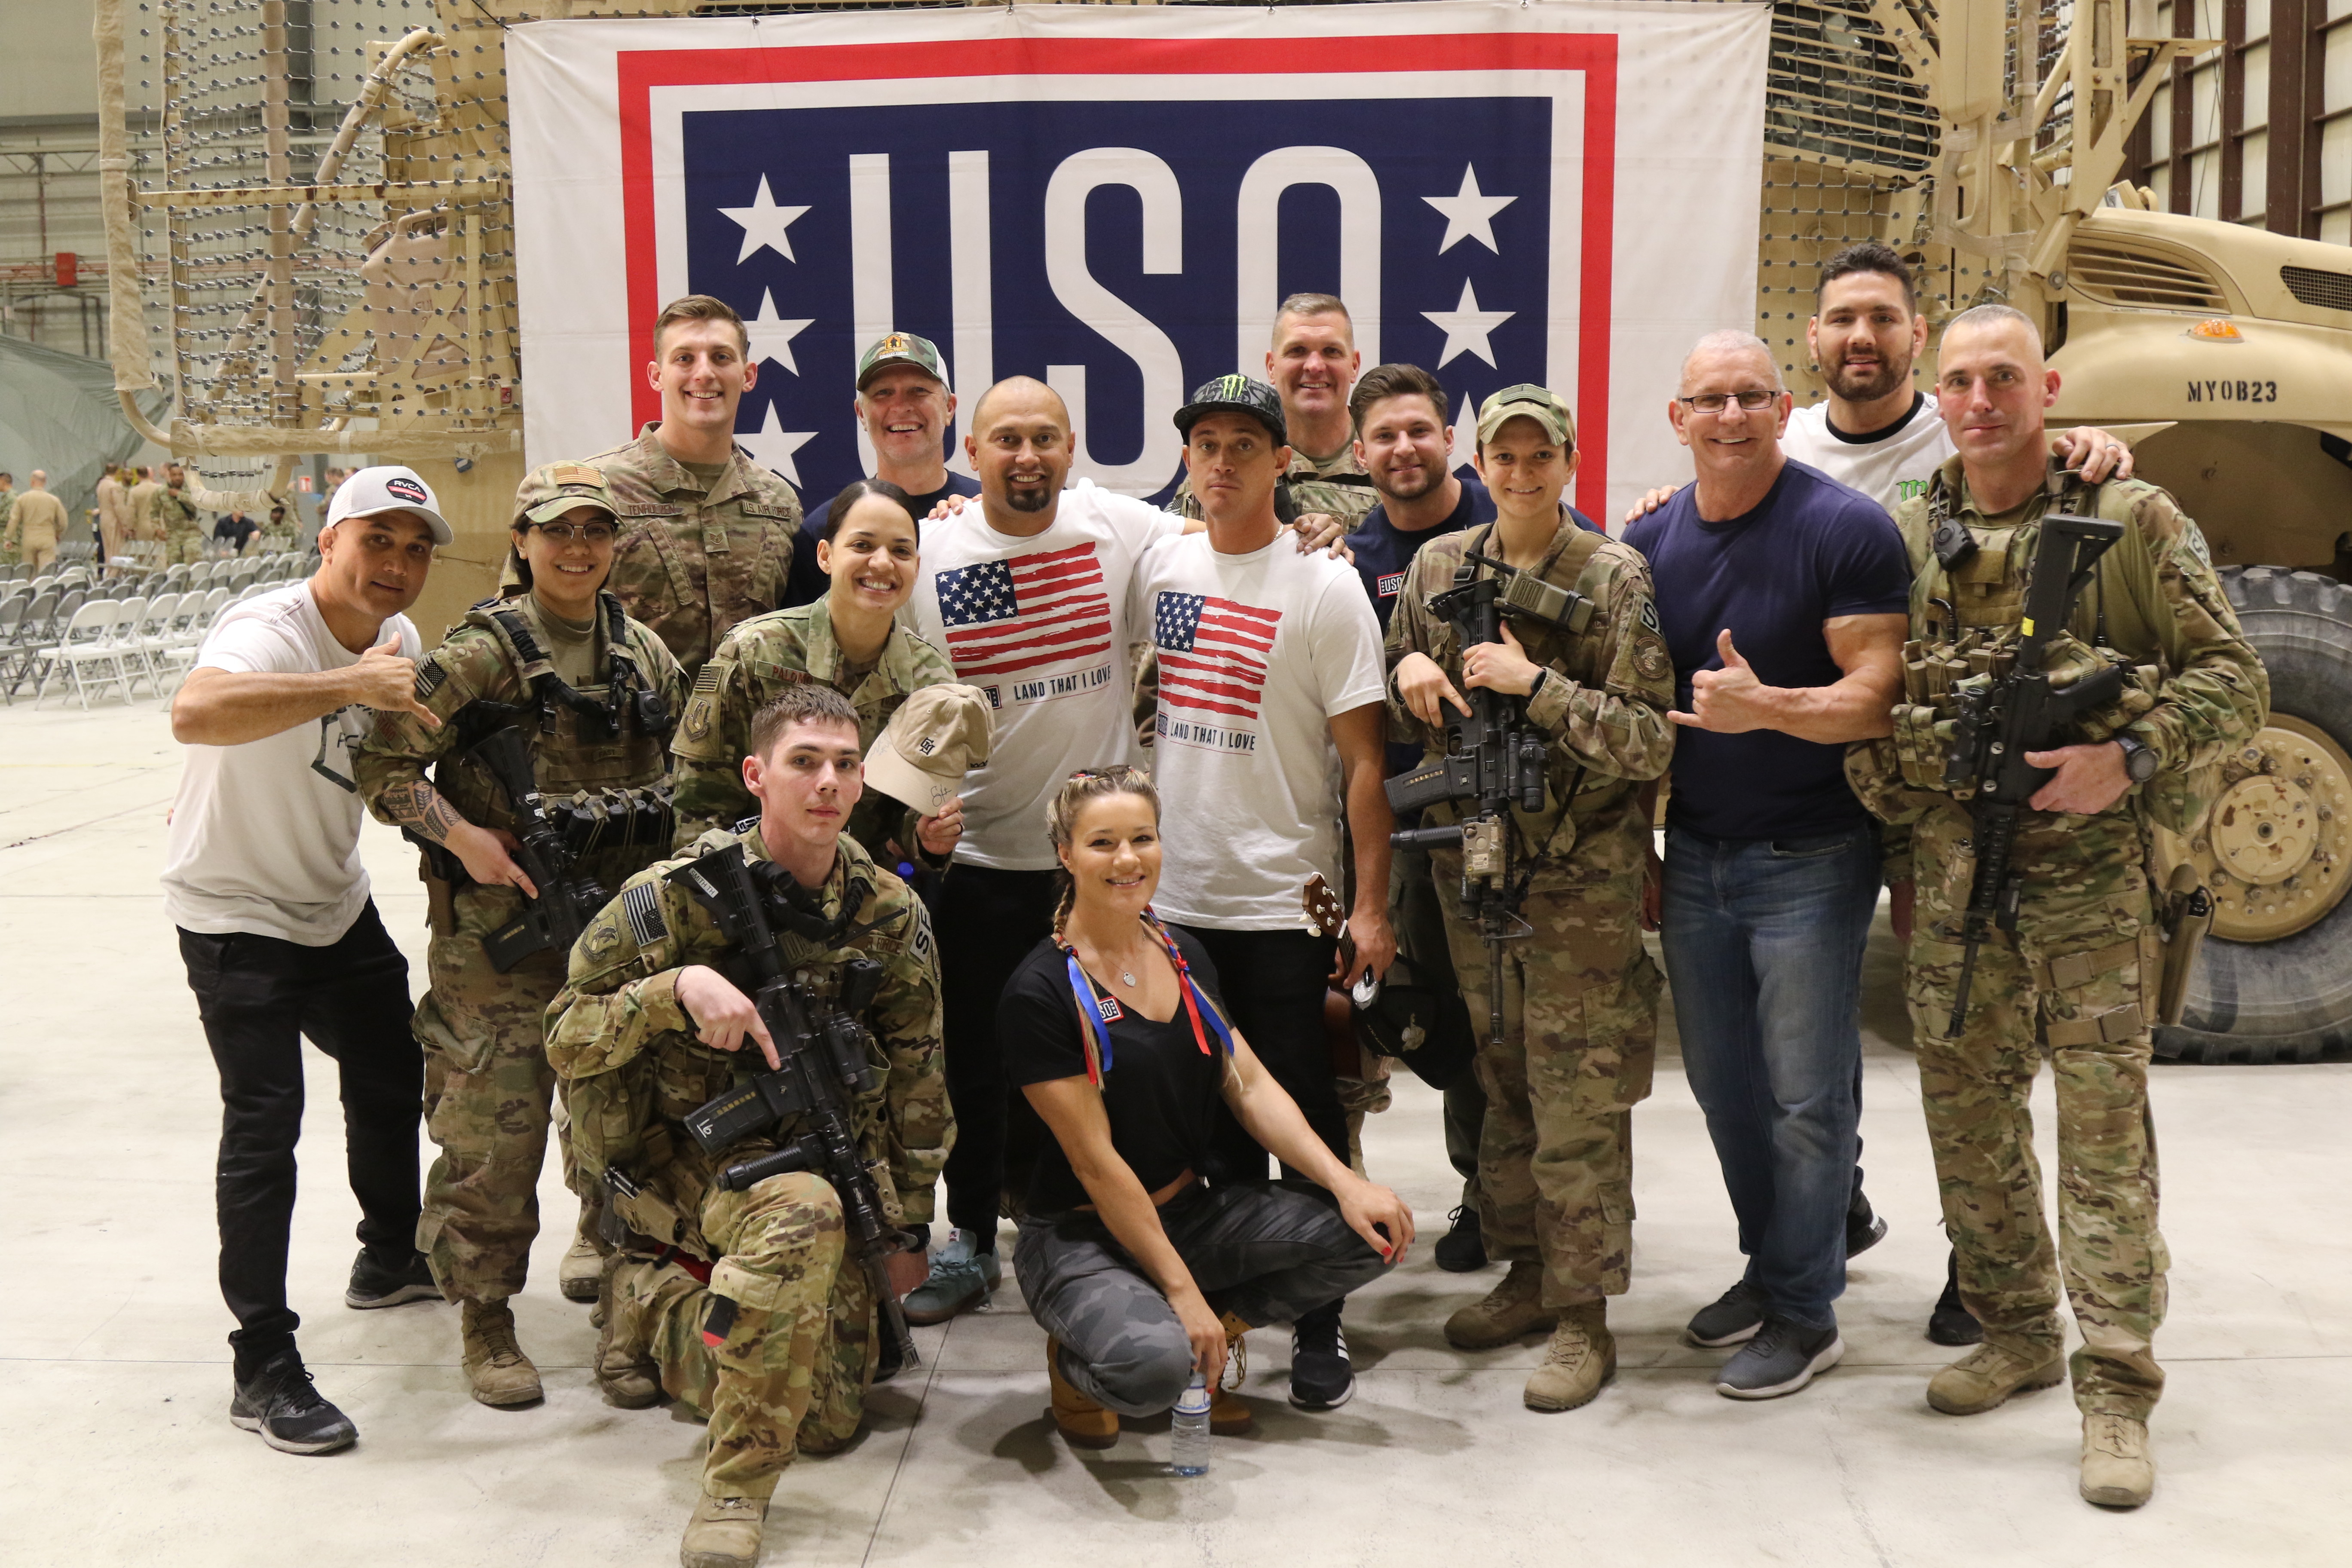 uso tour meaning